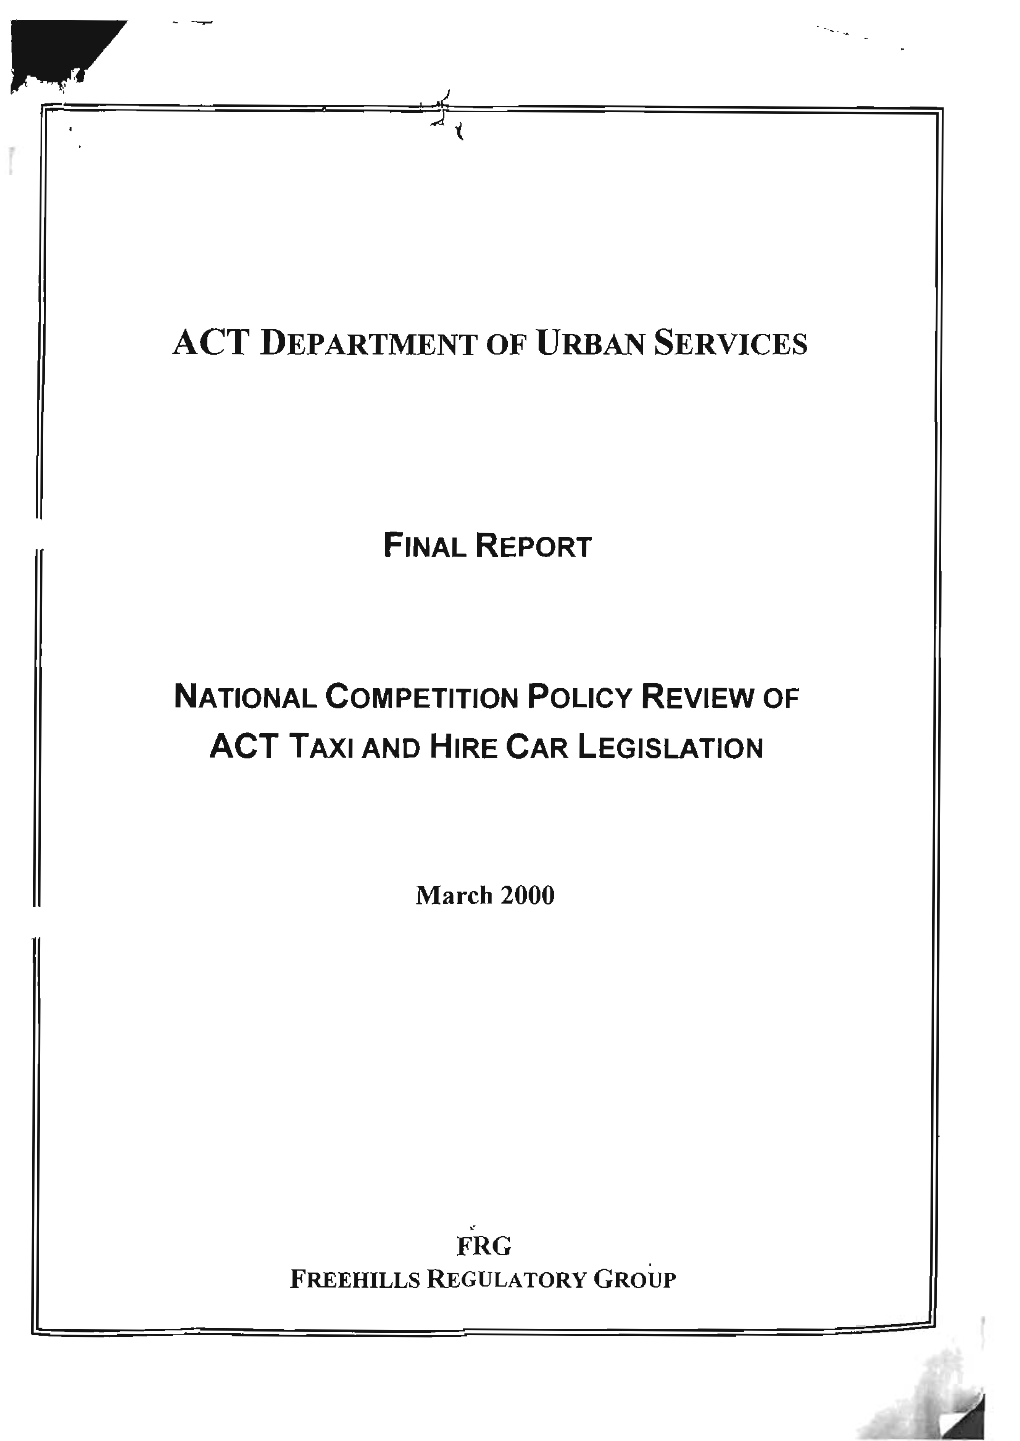 ACT Review of Taxi and Hire Car Legislation, March 2000.Pdf